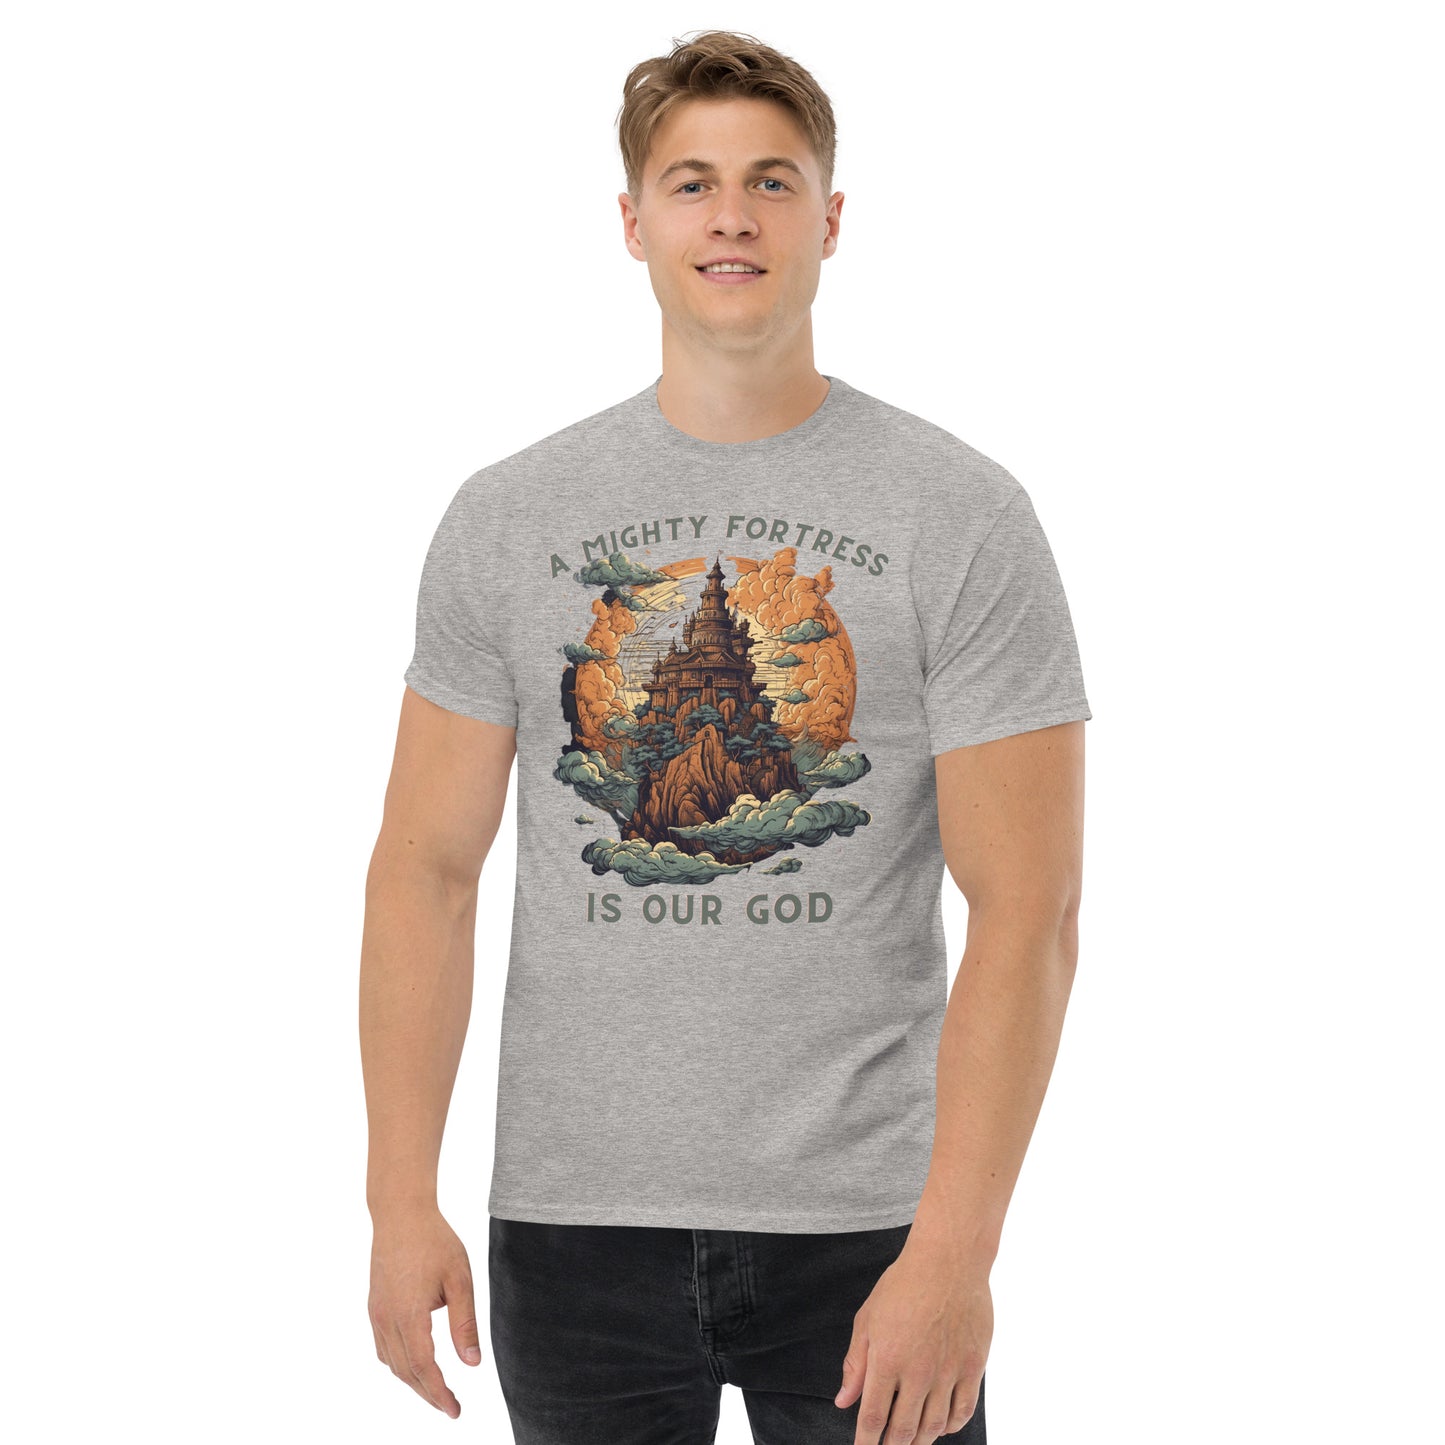 A Mighty Fortress - Men's Classic T-Shirt